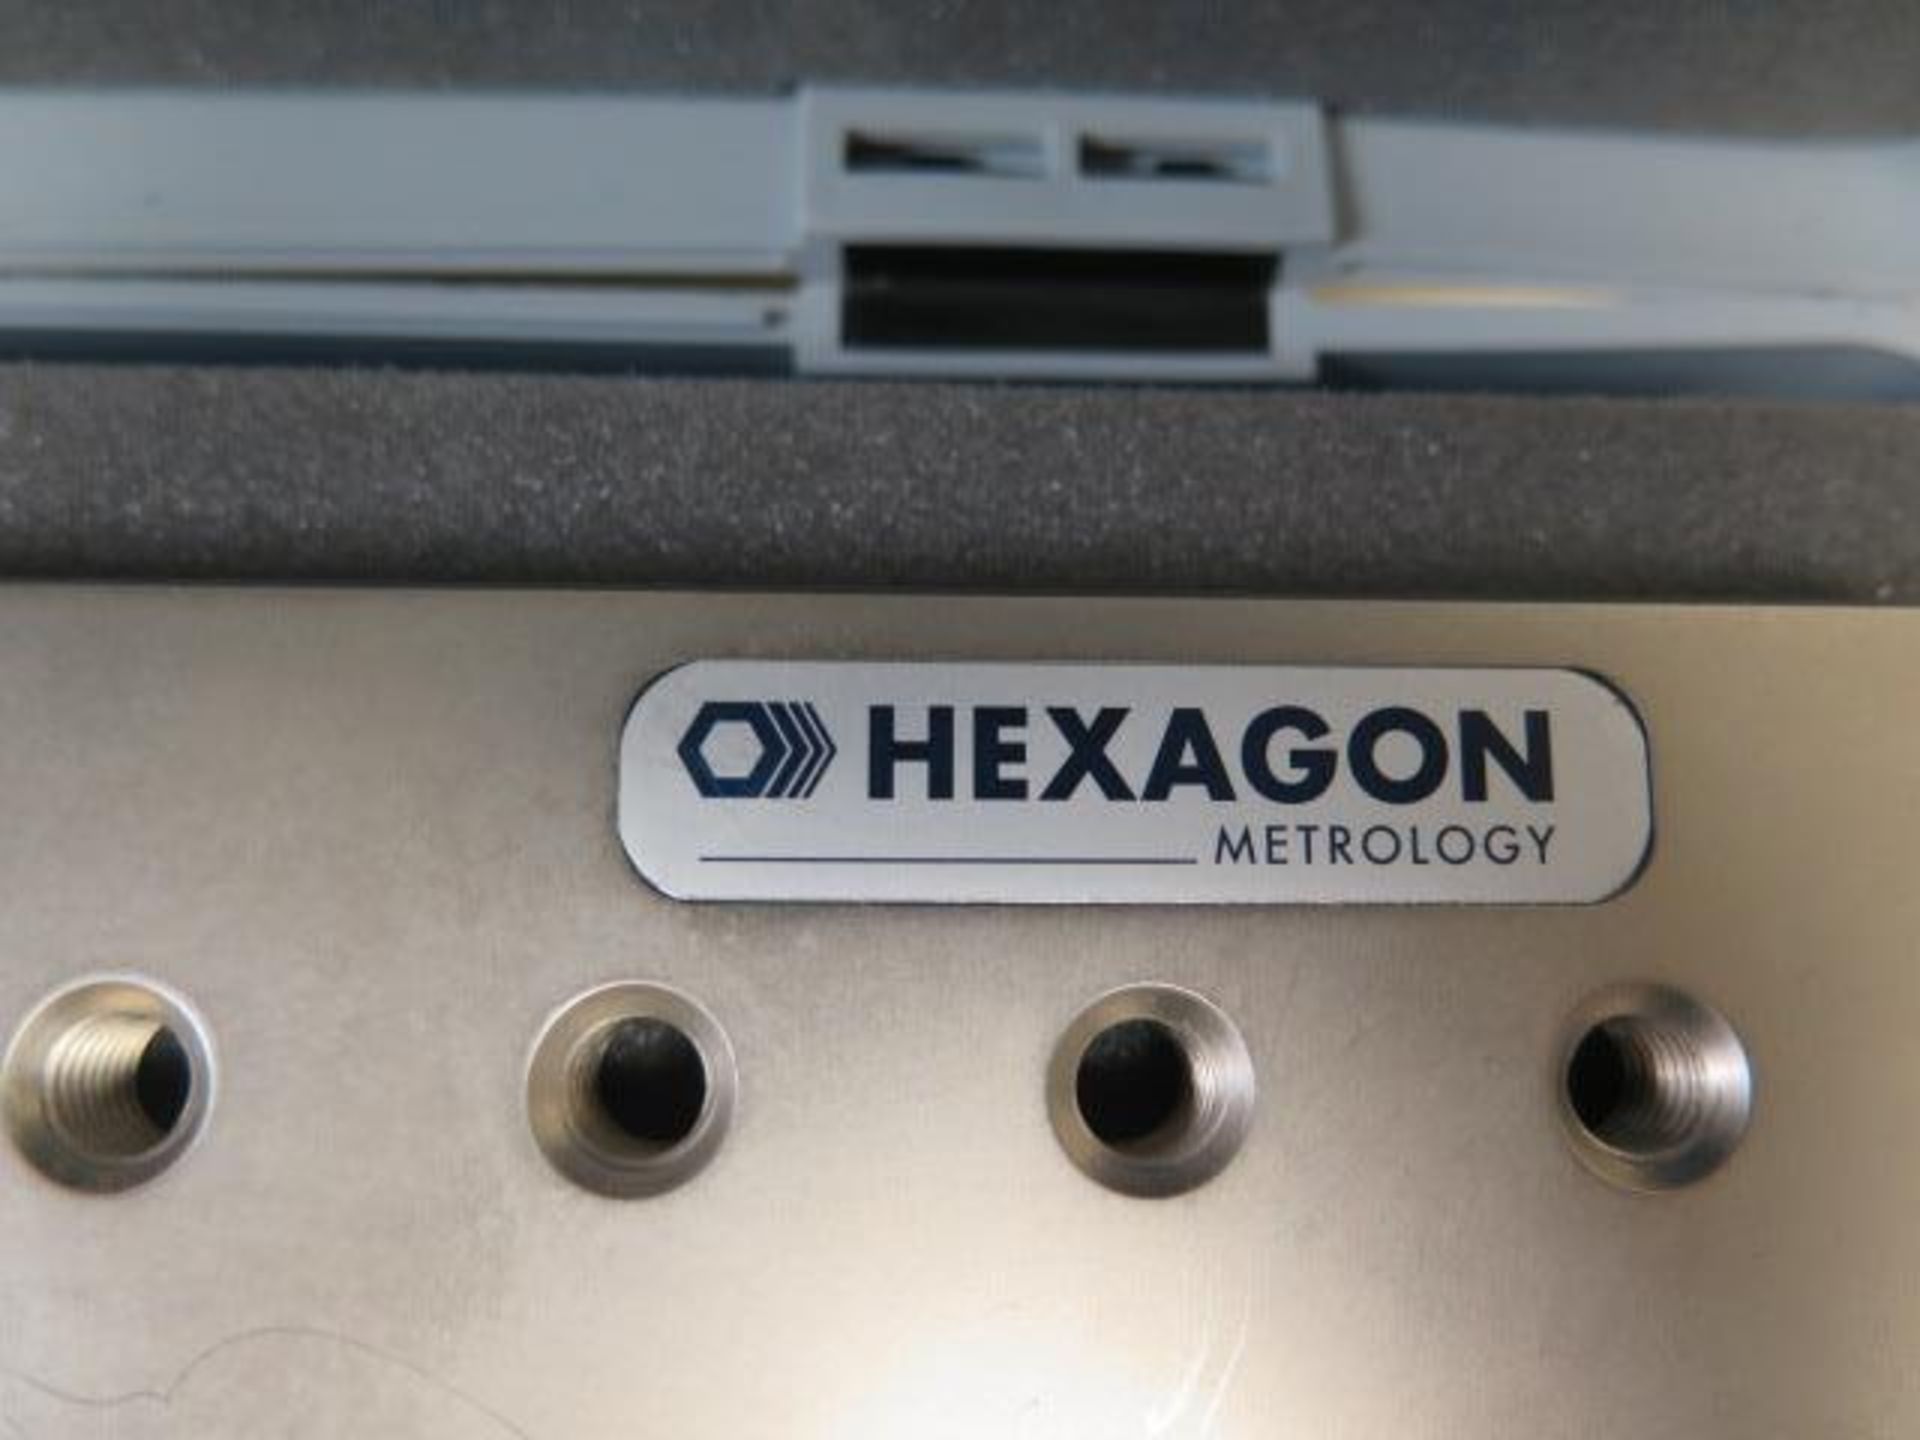 Hexagom Metrology "Swift-Fit" 11 3/4" x 15 3/4" Tapped-Hole Fixt Plate w/ Accessory Kit, SOLD AS IS - Image 5 of 6